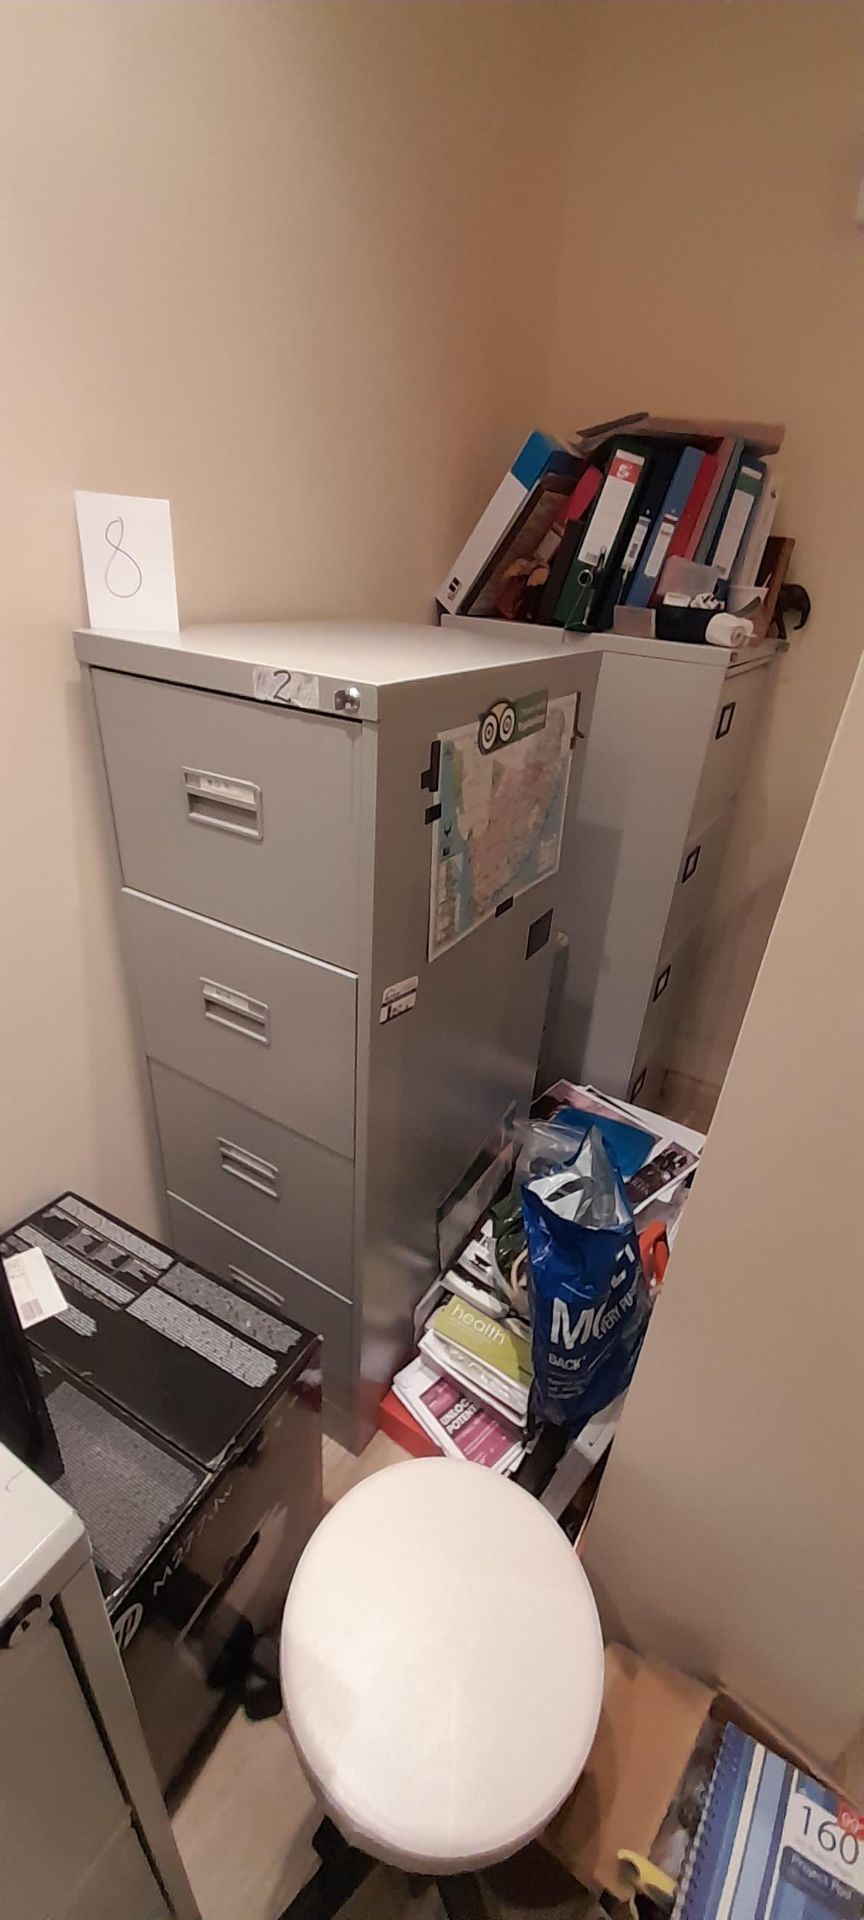 2 x 4 drawer grey steel filing cabinet, contents excluded